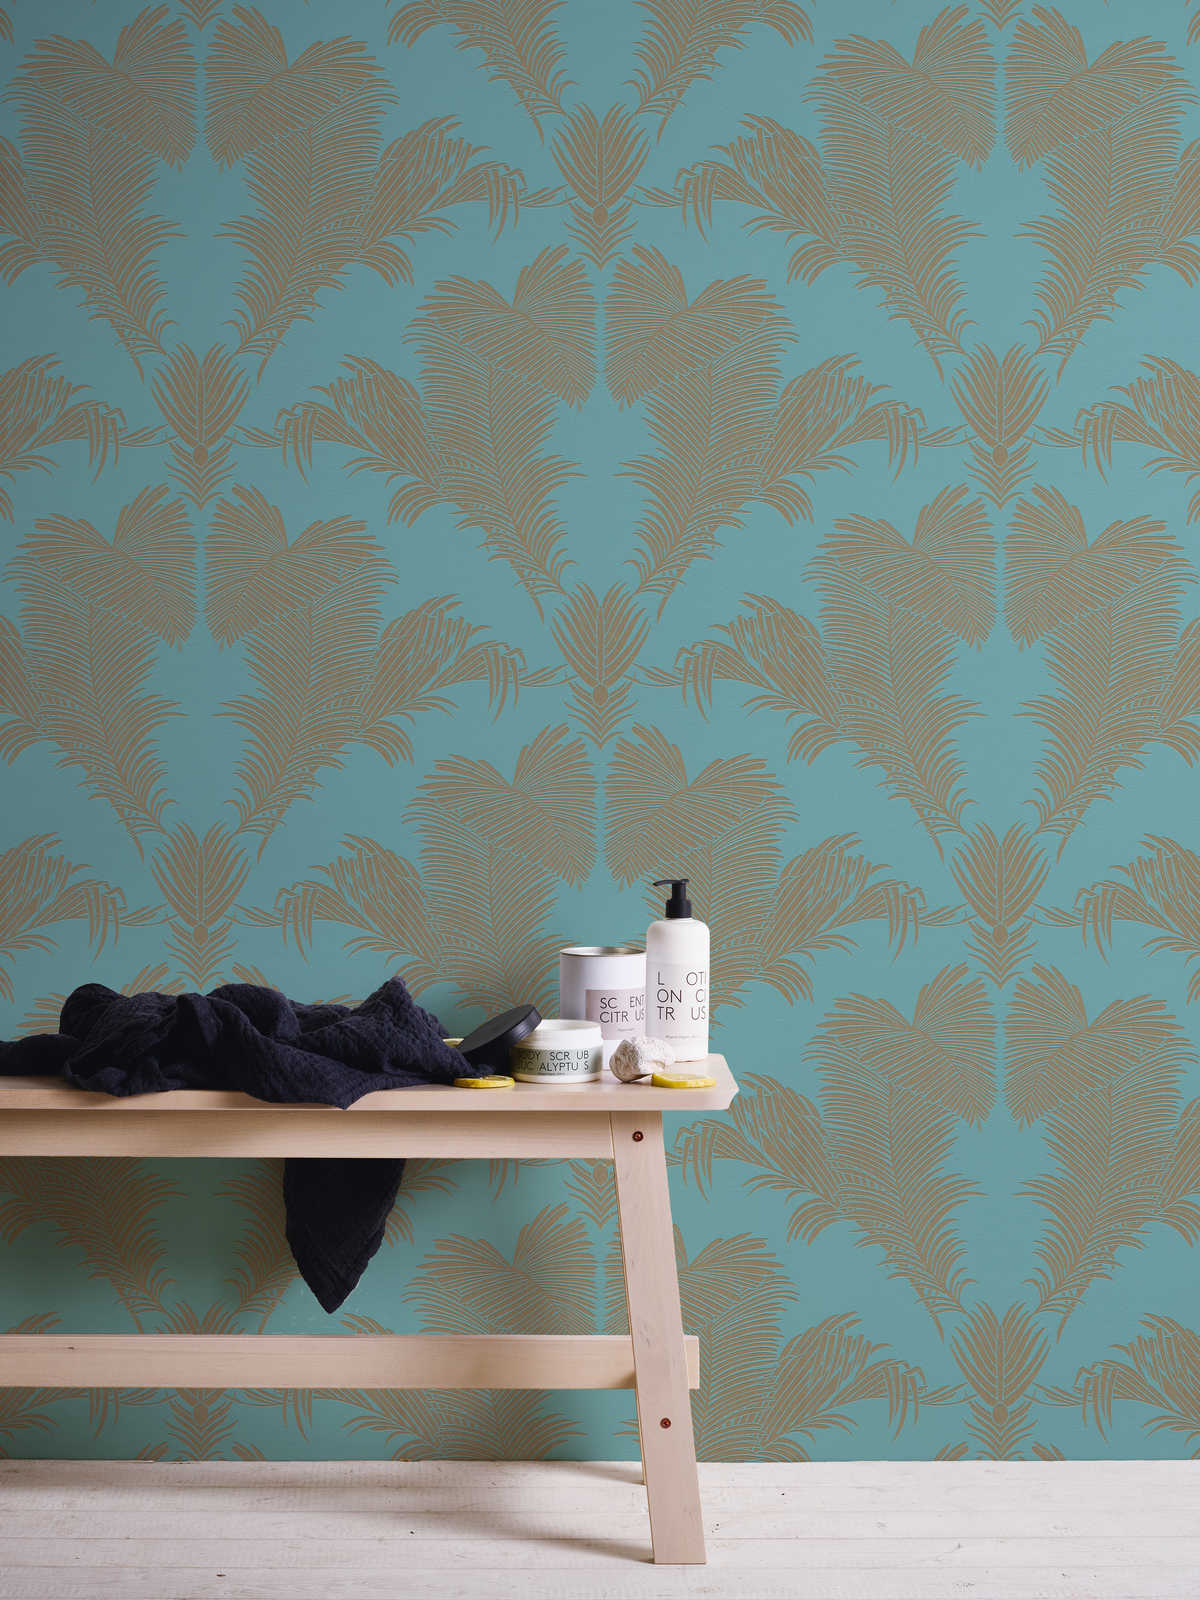             Turquoise non-woven wallpaper with leaf motif in metallic gold
        